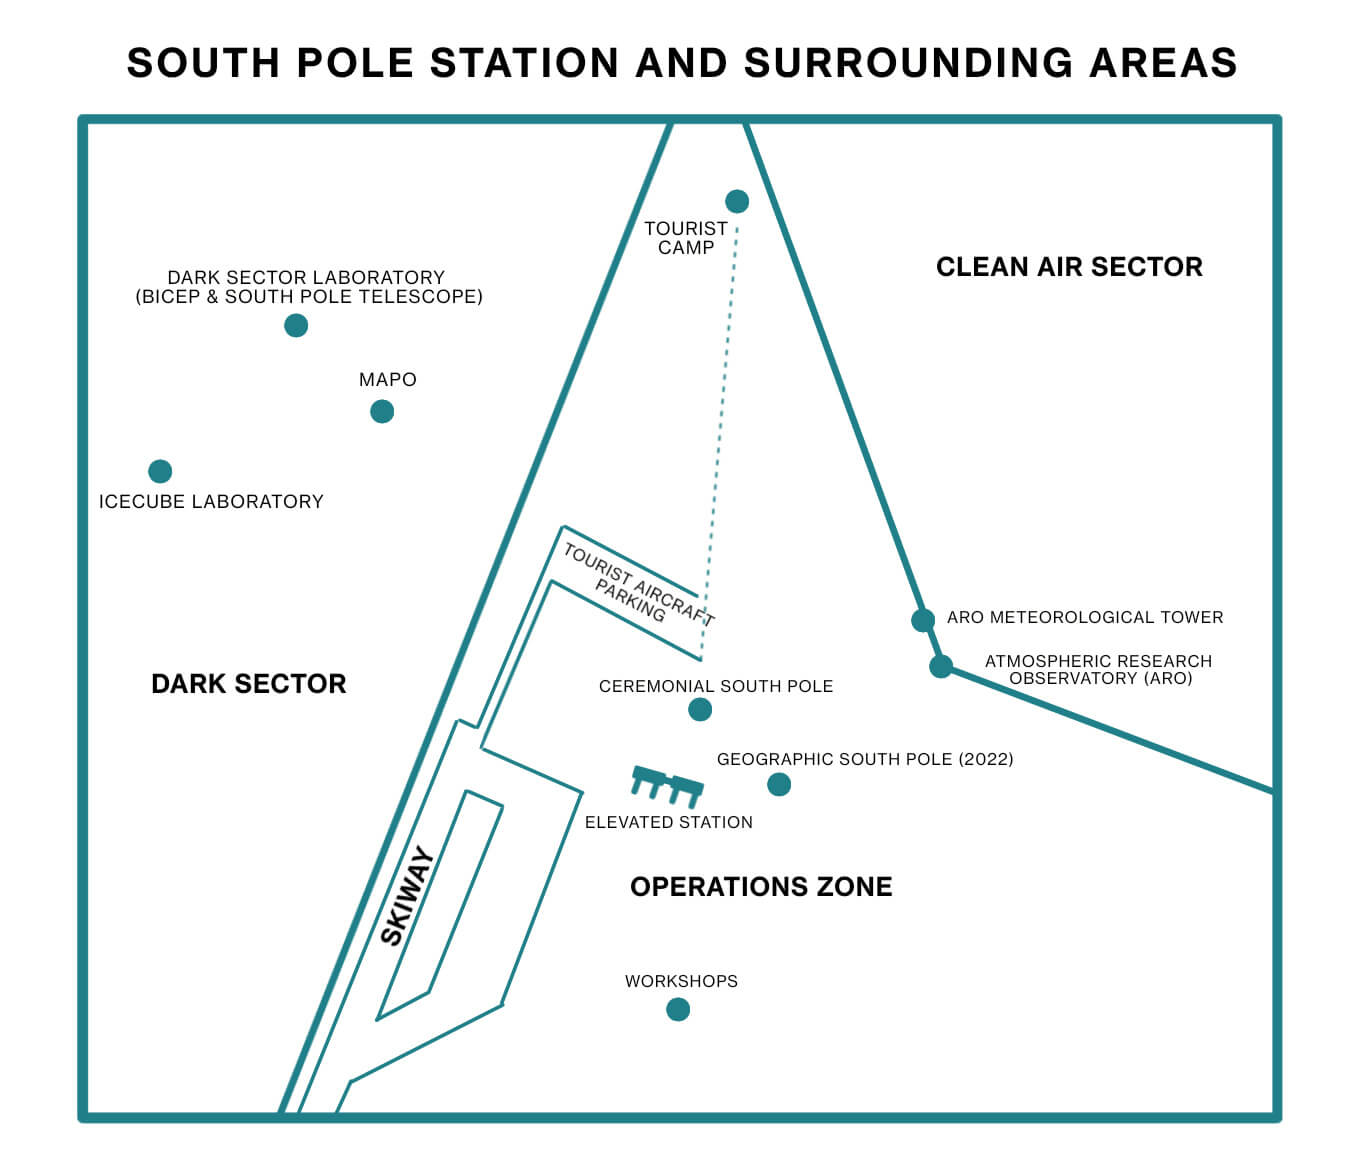 A map of the South Pole Station and surrounding areas. Map shows the Dark Sector on the left which contains the Ice Cube Lab, Dark Sector Lab (BICEP & South Pole Telescope), and MAPO. The right side of the photo is the Clean Air Sector which contains the meteorological tower and Atmospheric Research Observatory (ARO). Down the center of the photo is the Operations Zone which contains the skiway, tourist aircraft parking and camp, workshops, elevated station, ceremonial South Pole, and Geographic South Pole